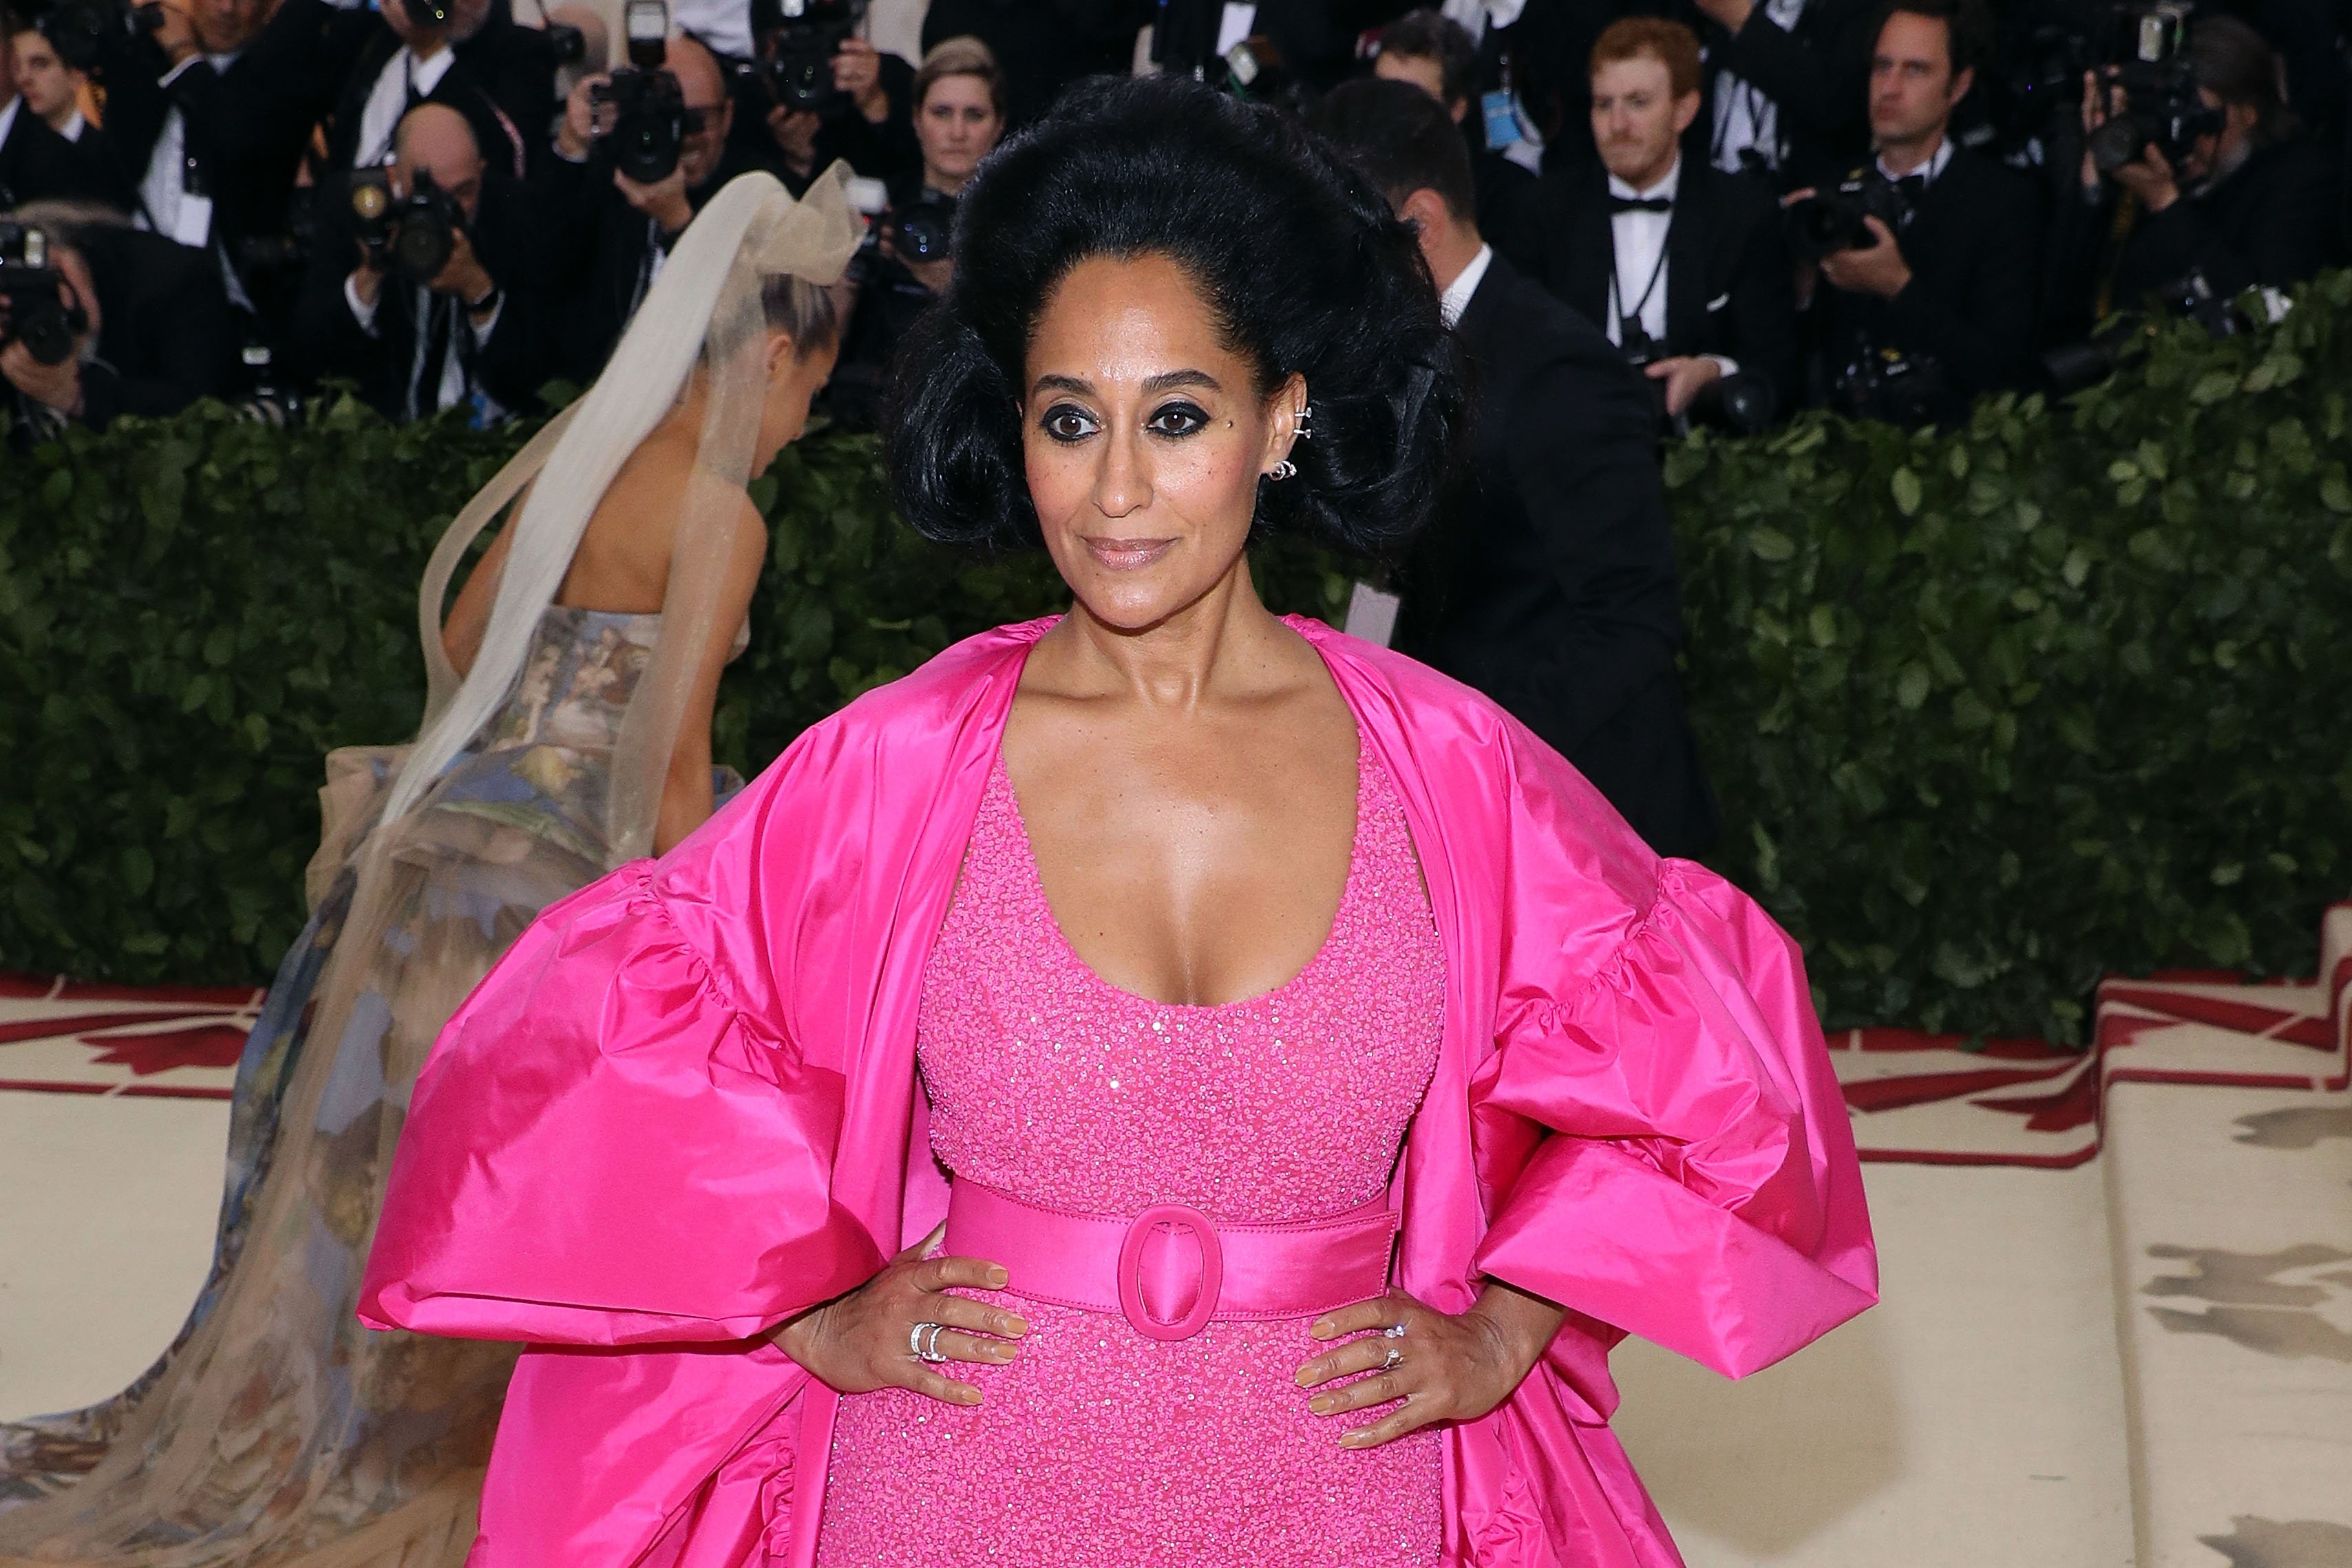 Tracee Ellis Ross poses at the 2018 Costume Institute Benefit at Metropolitan Museum of Art on May 7, 2018 in New York City. | Source: Getty Images